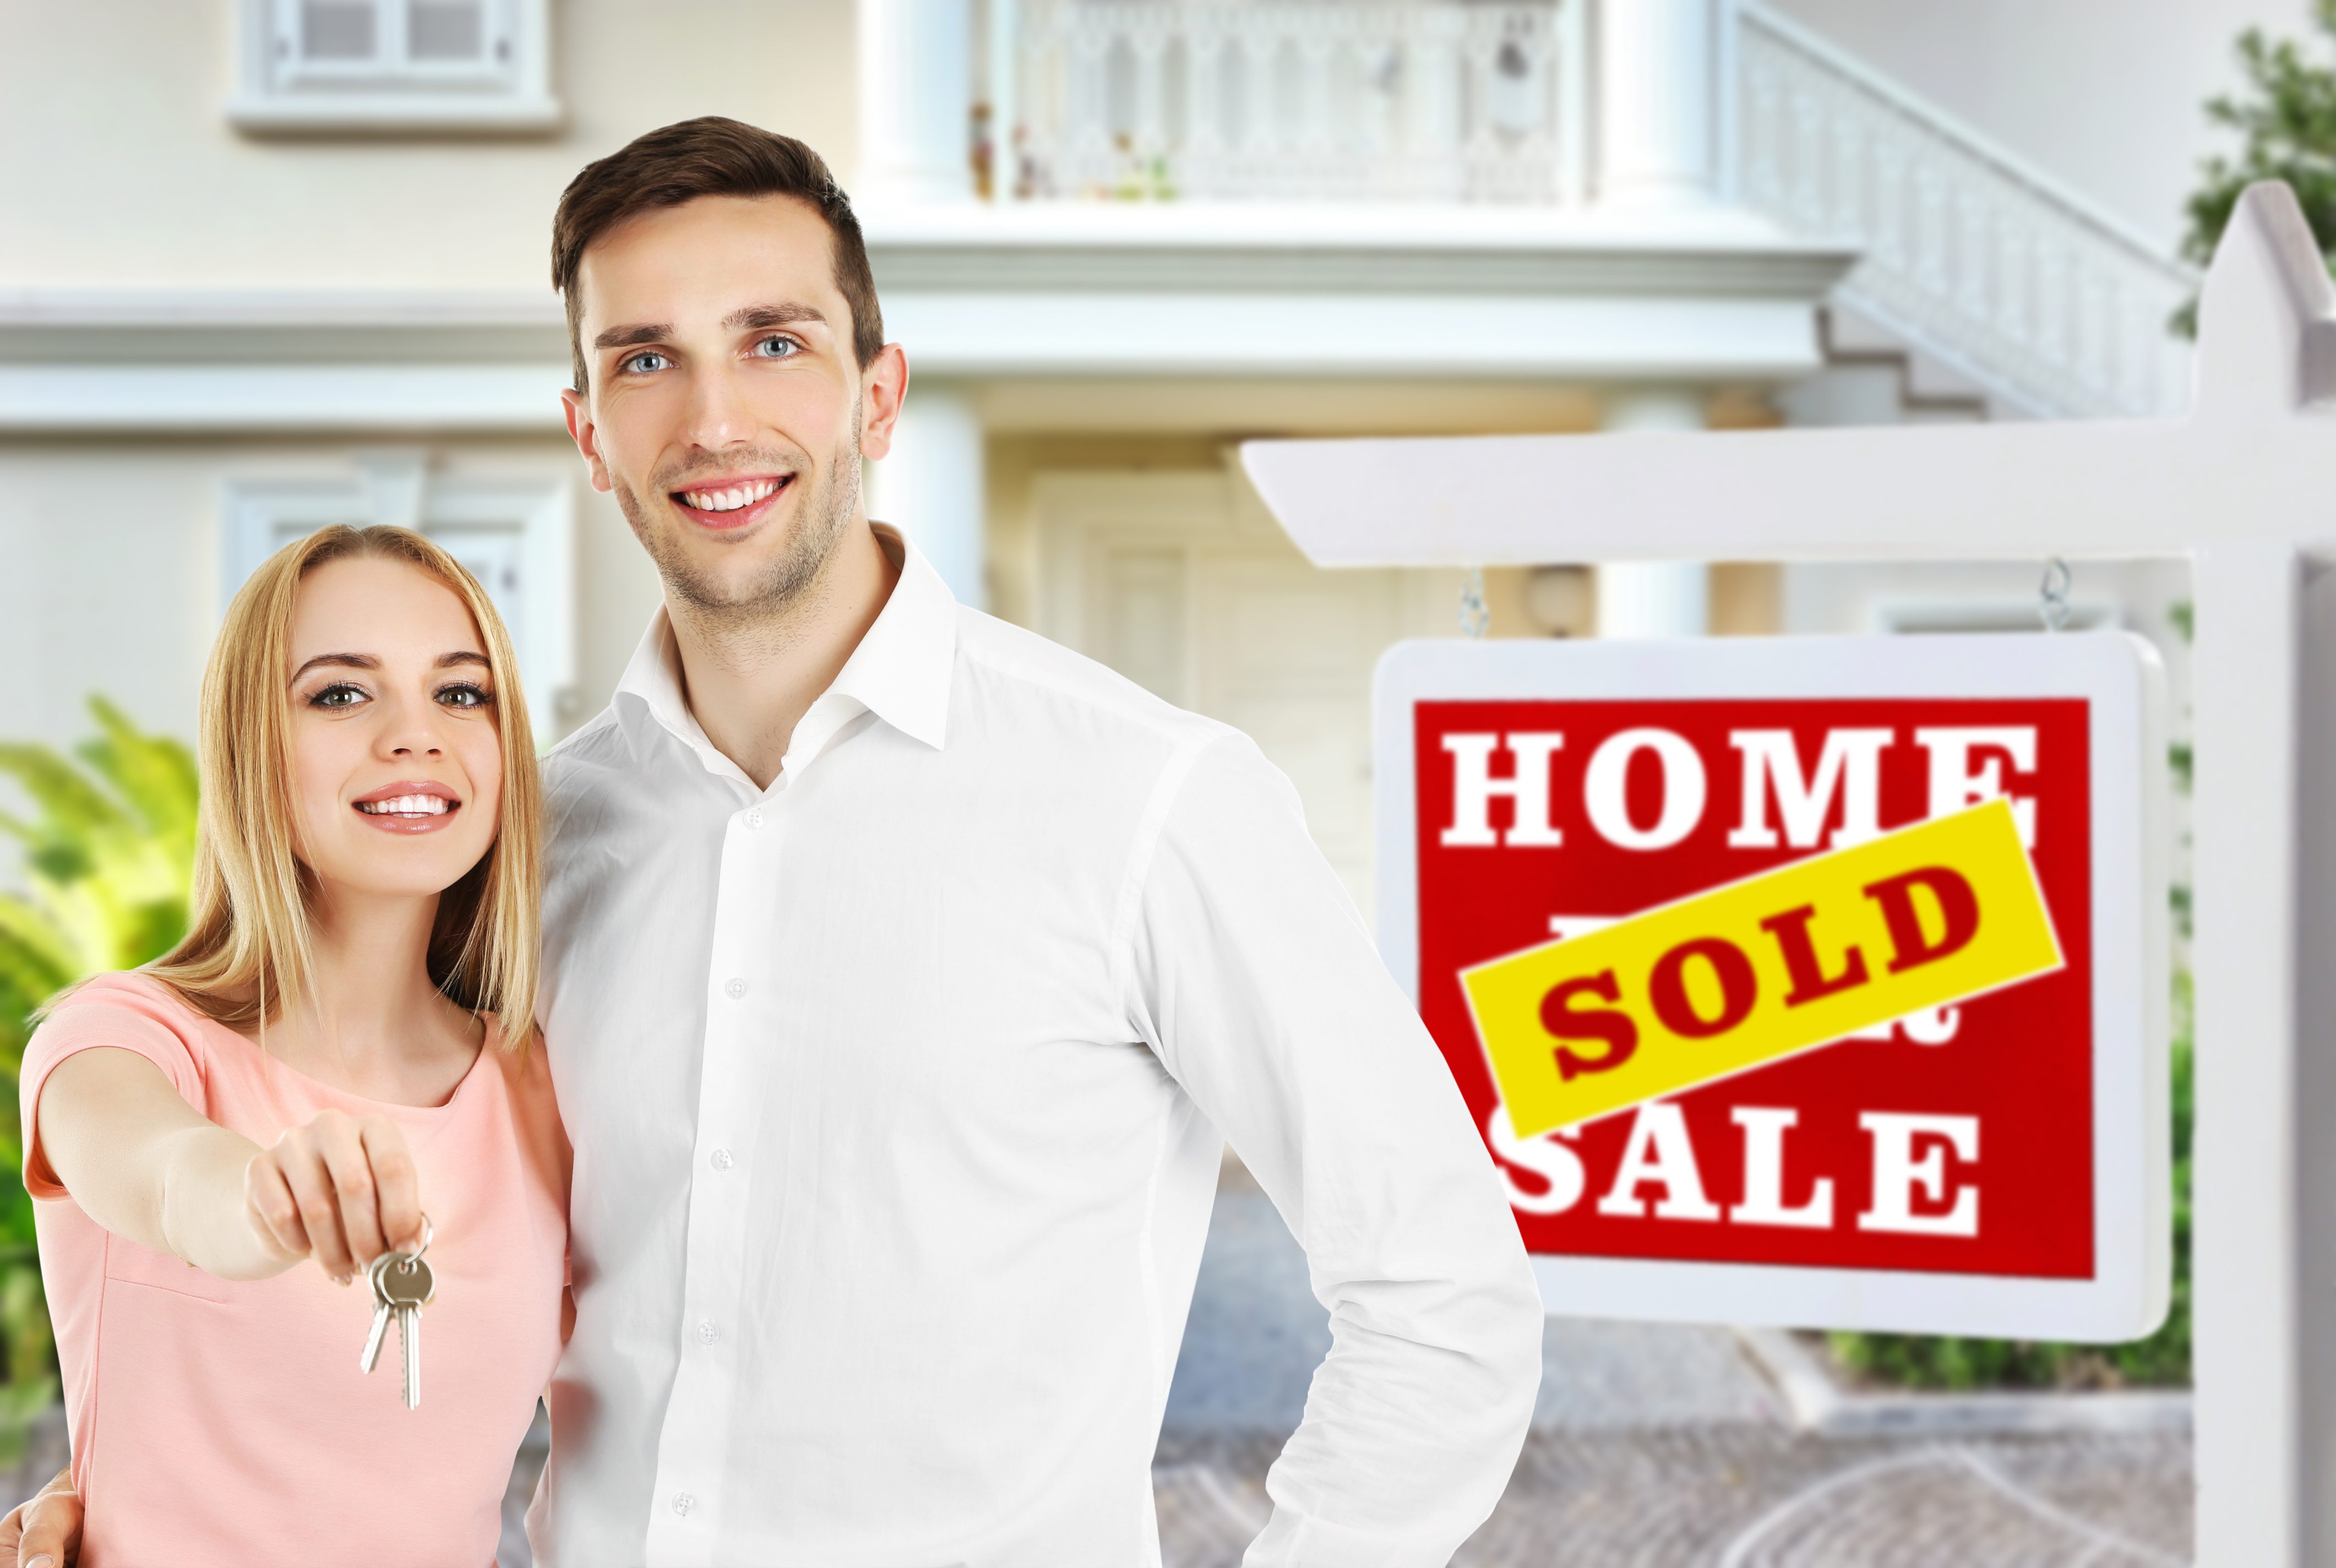 Do You Really Want Your Realtor to Call You a motivated Seller